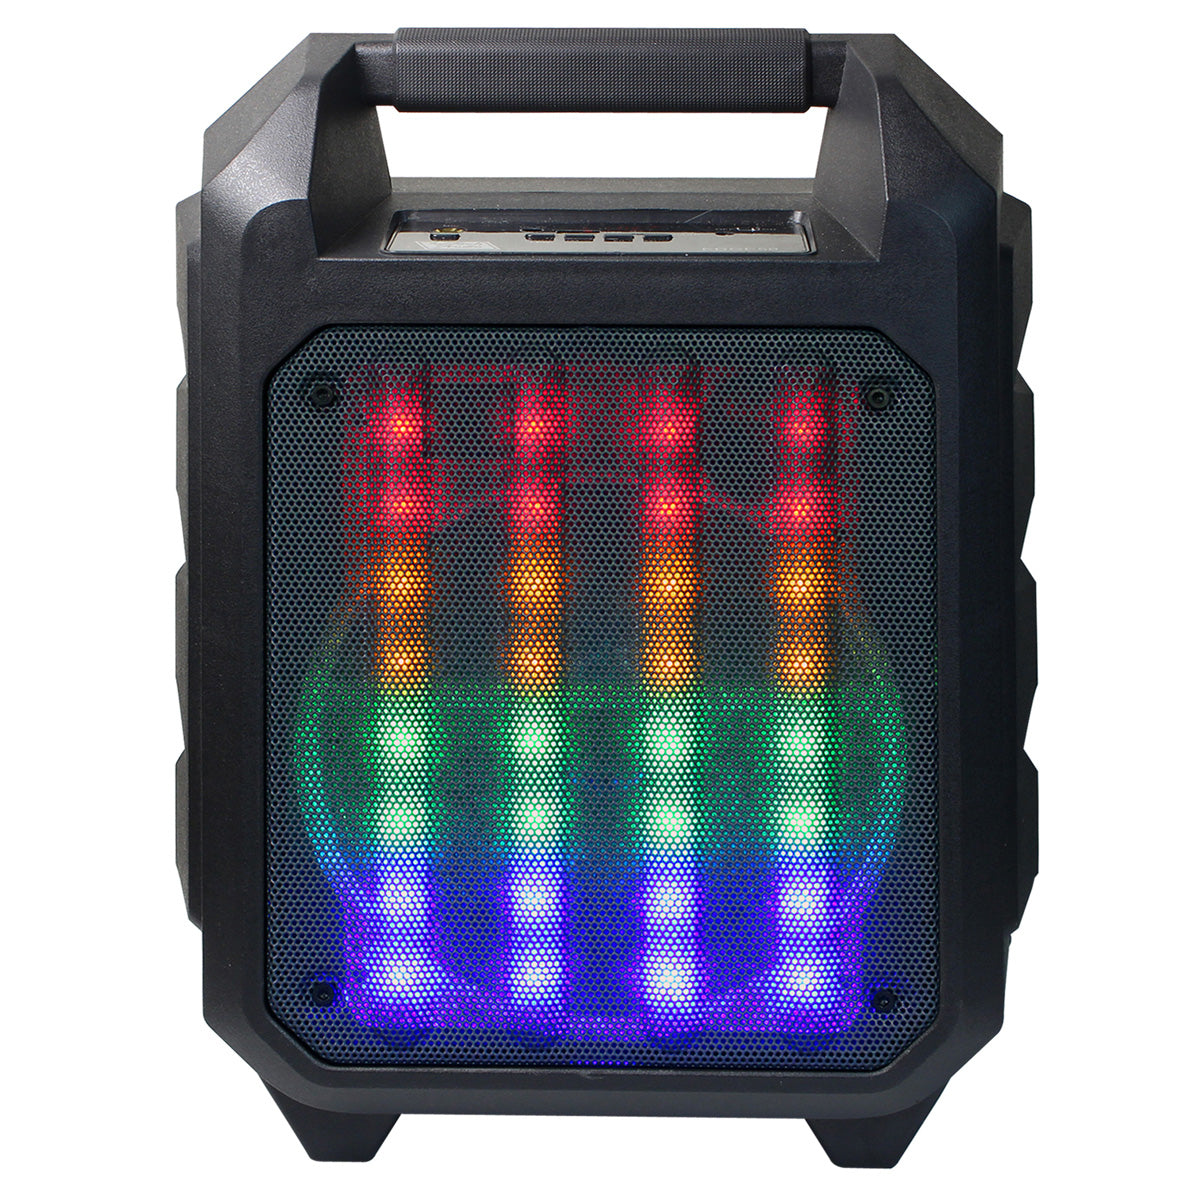 Fully Amplified Portable 900 Watts Peak Power 6.5” Speaker with LED LIGHT